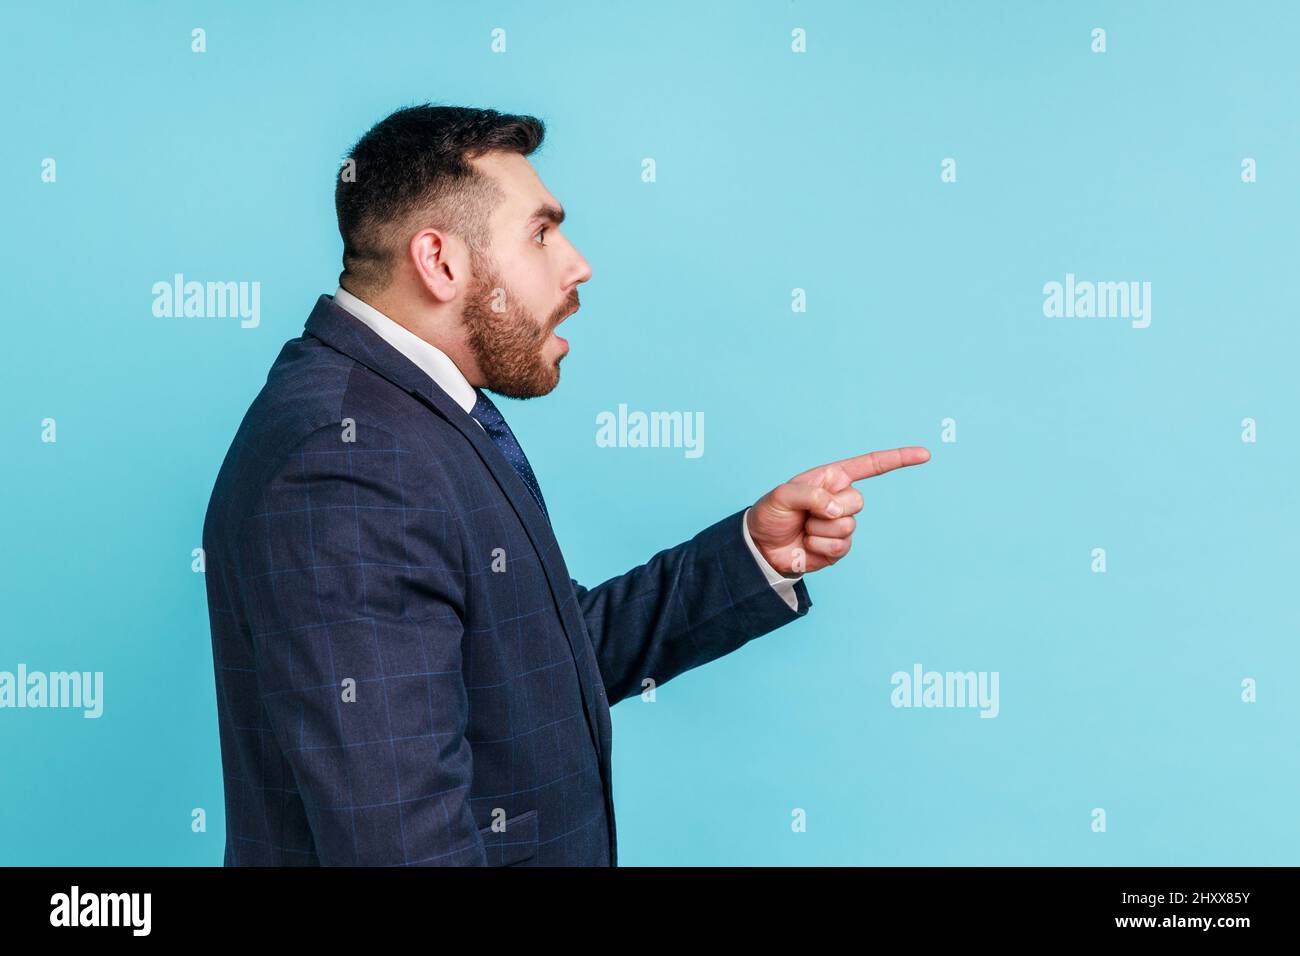 Portrait of attentive handsome bearded young man wearing official style suit having shocked facial expression, pointing finger aside. Indoor studio shot isolated on blue background. Stock Photo